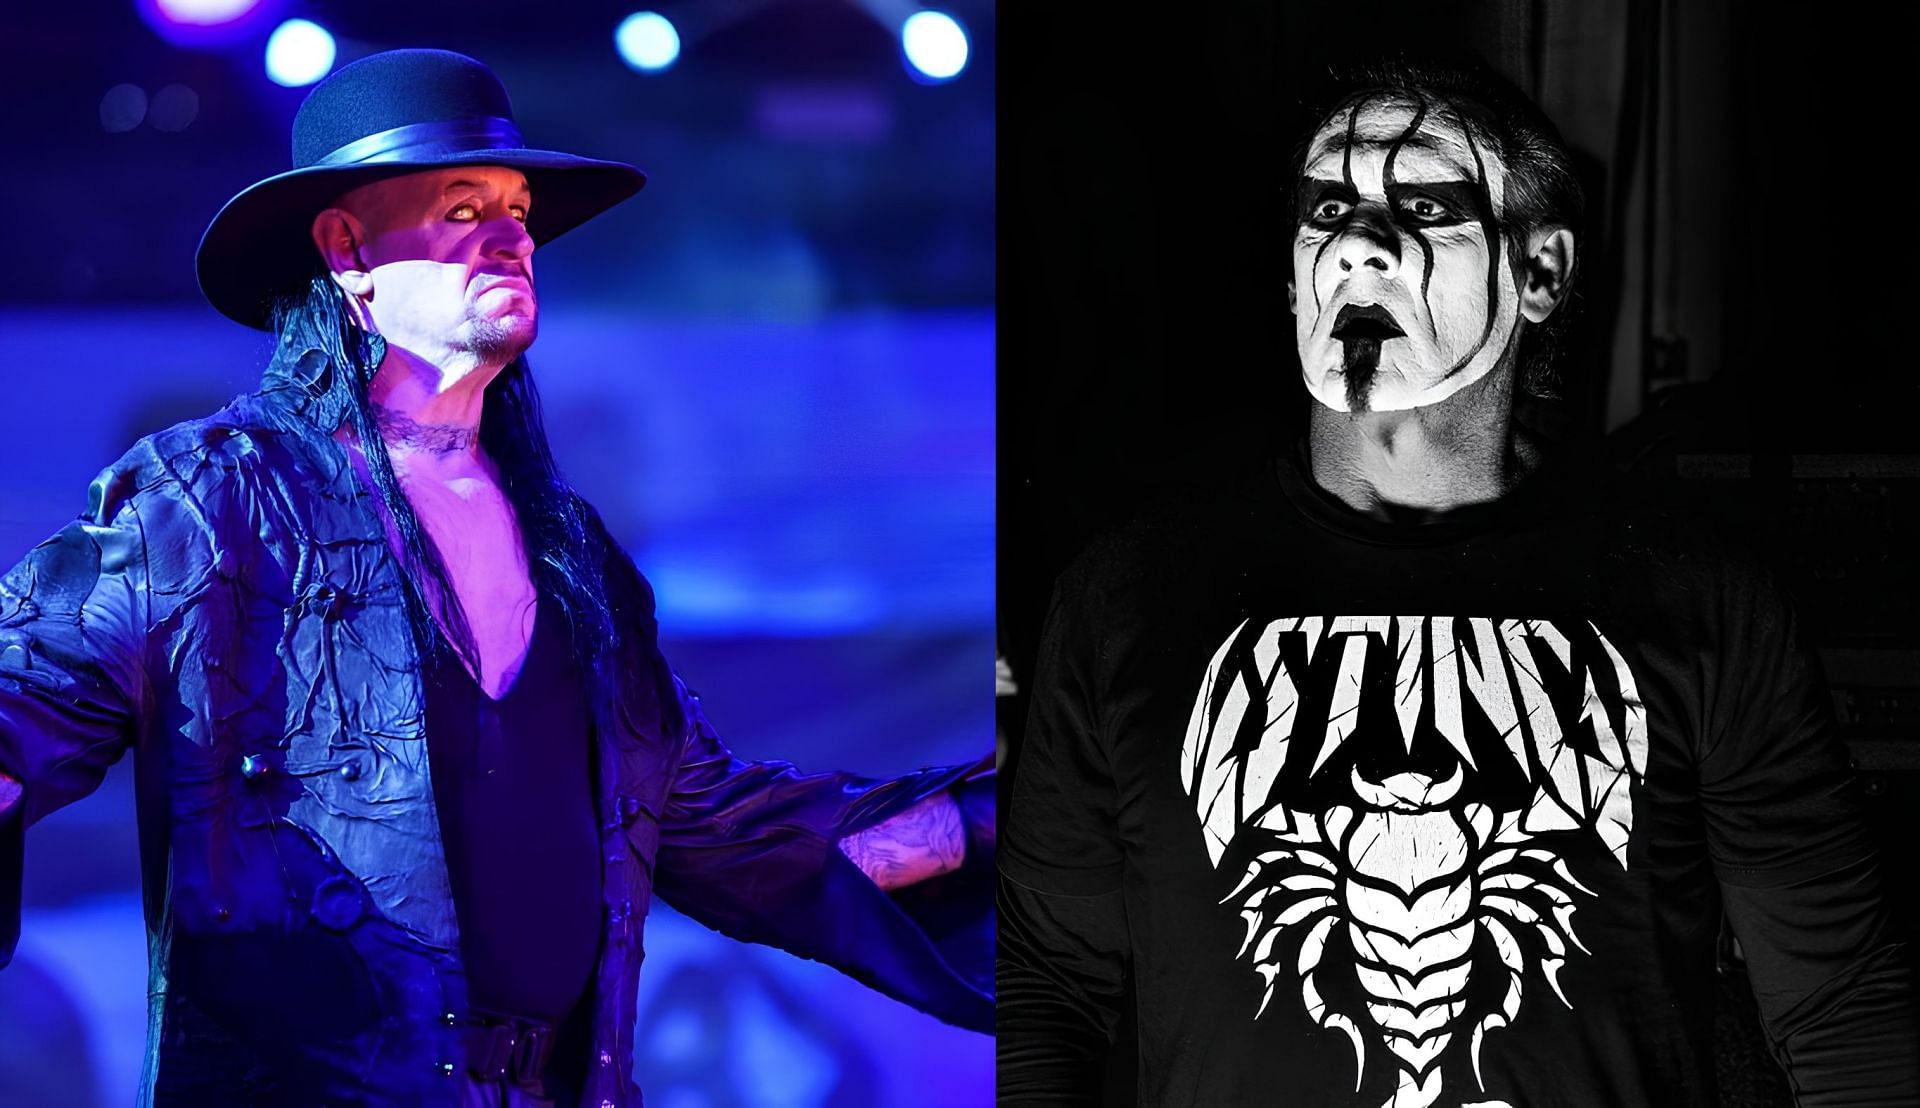 The Undertaker (left) and Sting (right)